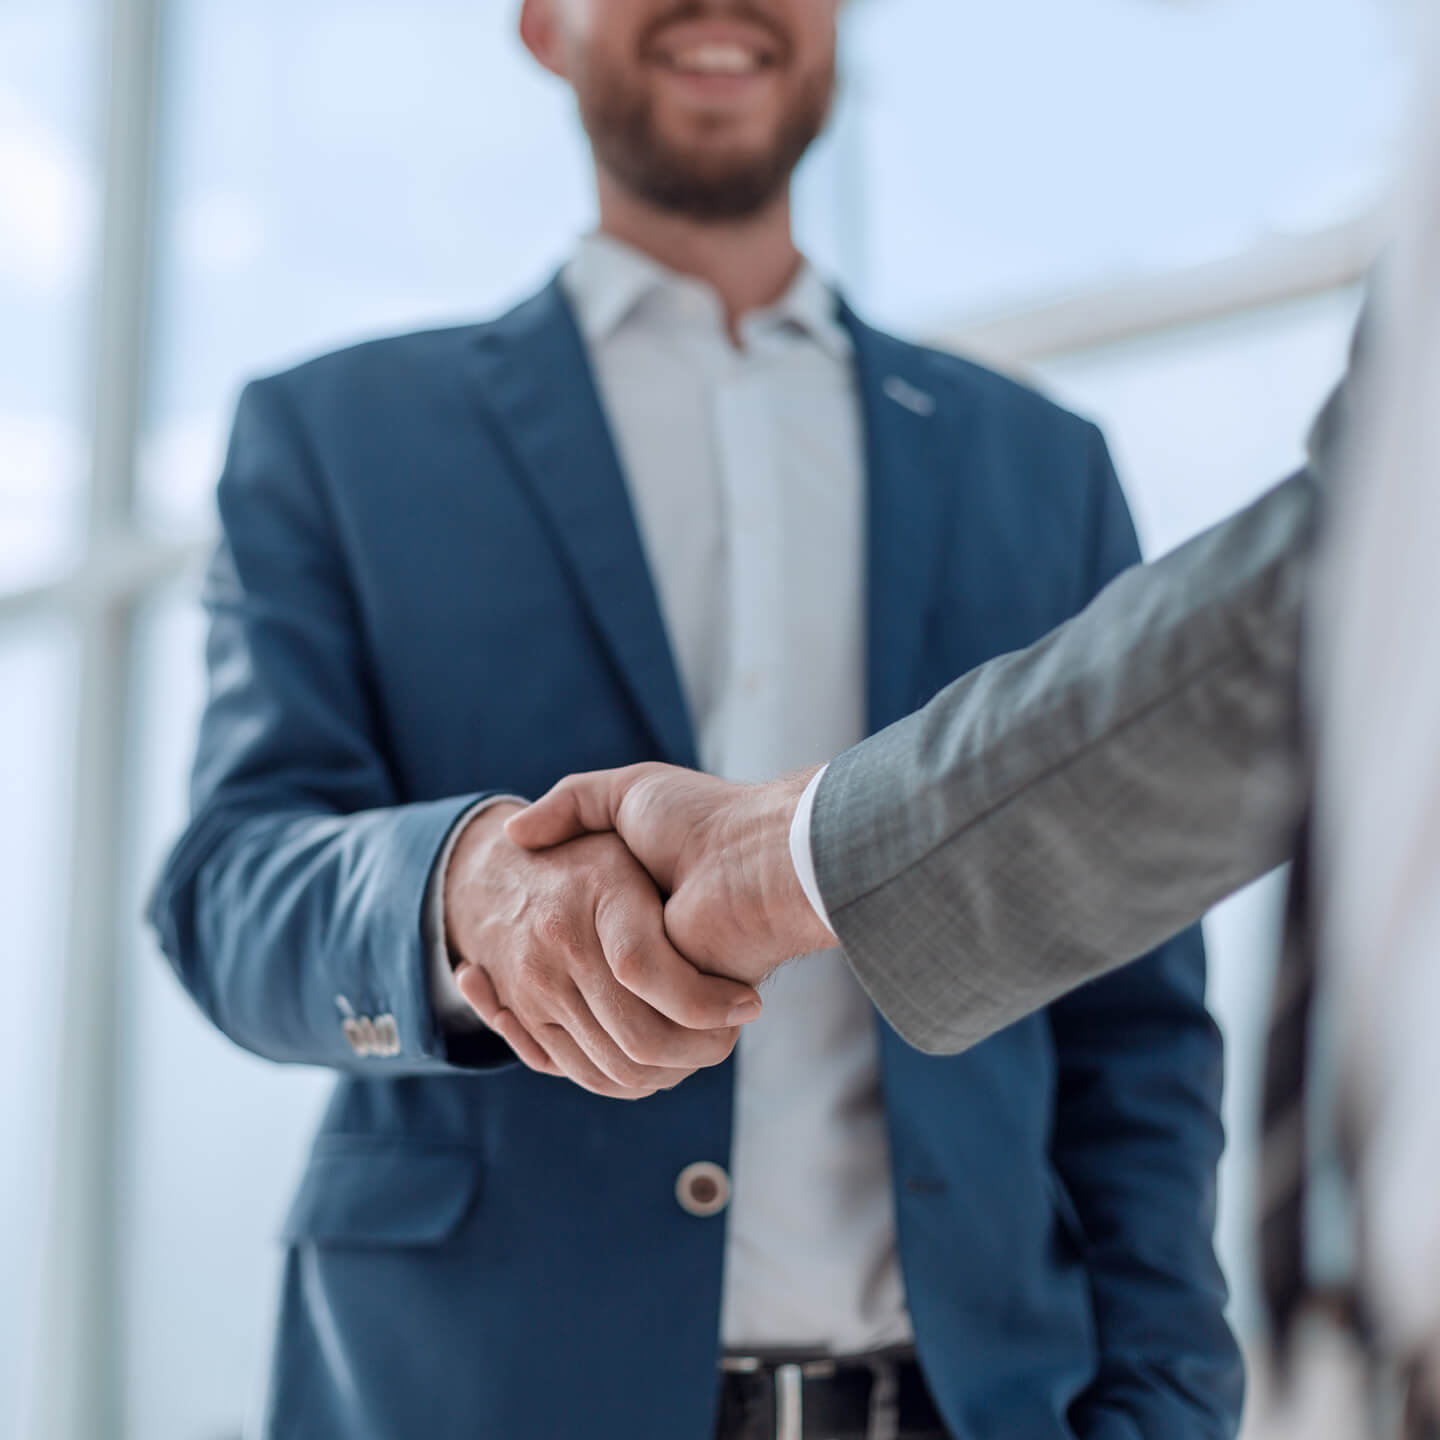 Man in blue suit shakes hands with business partner